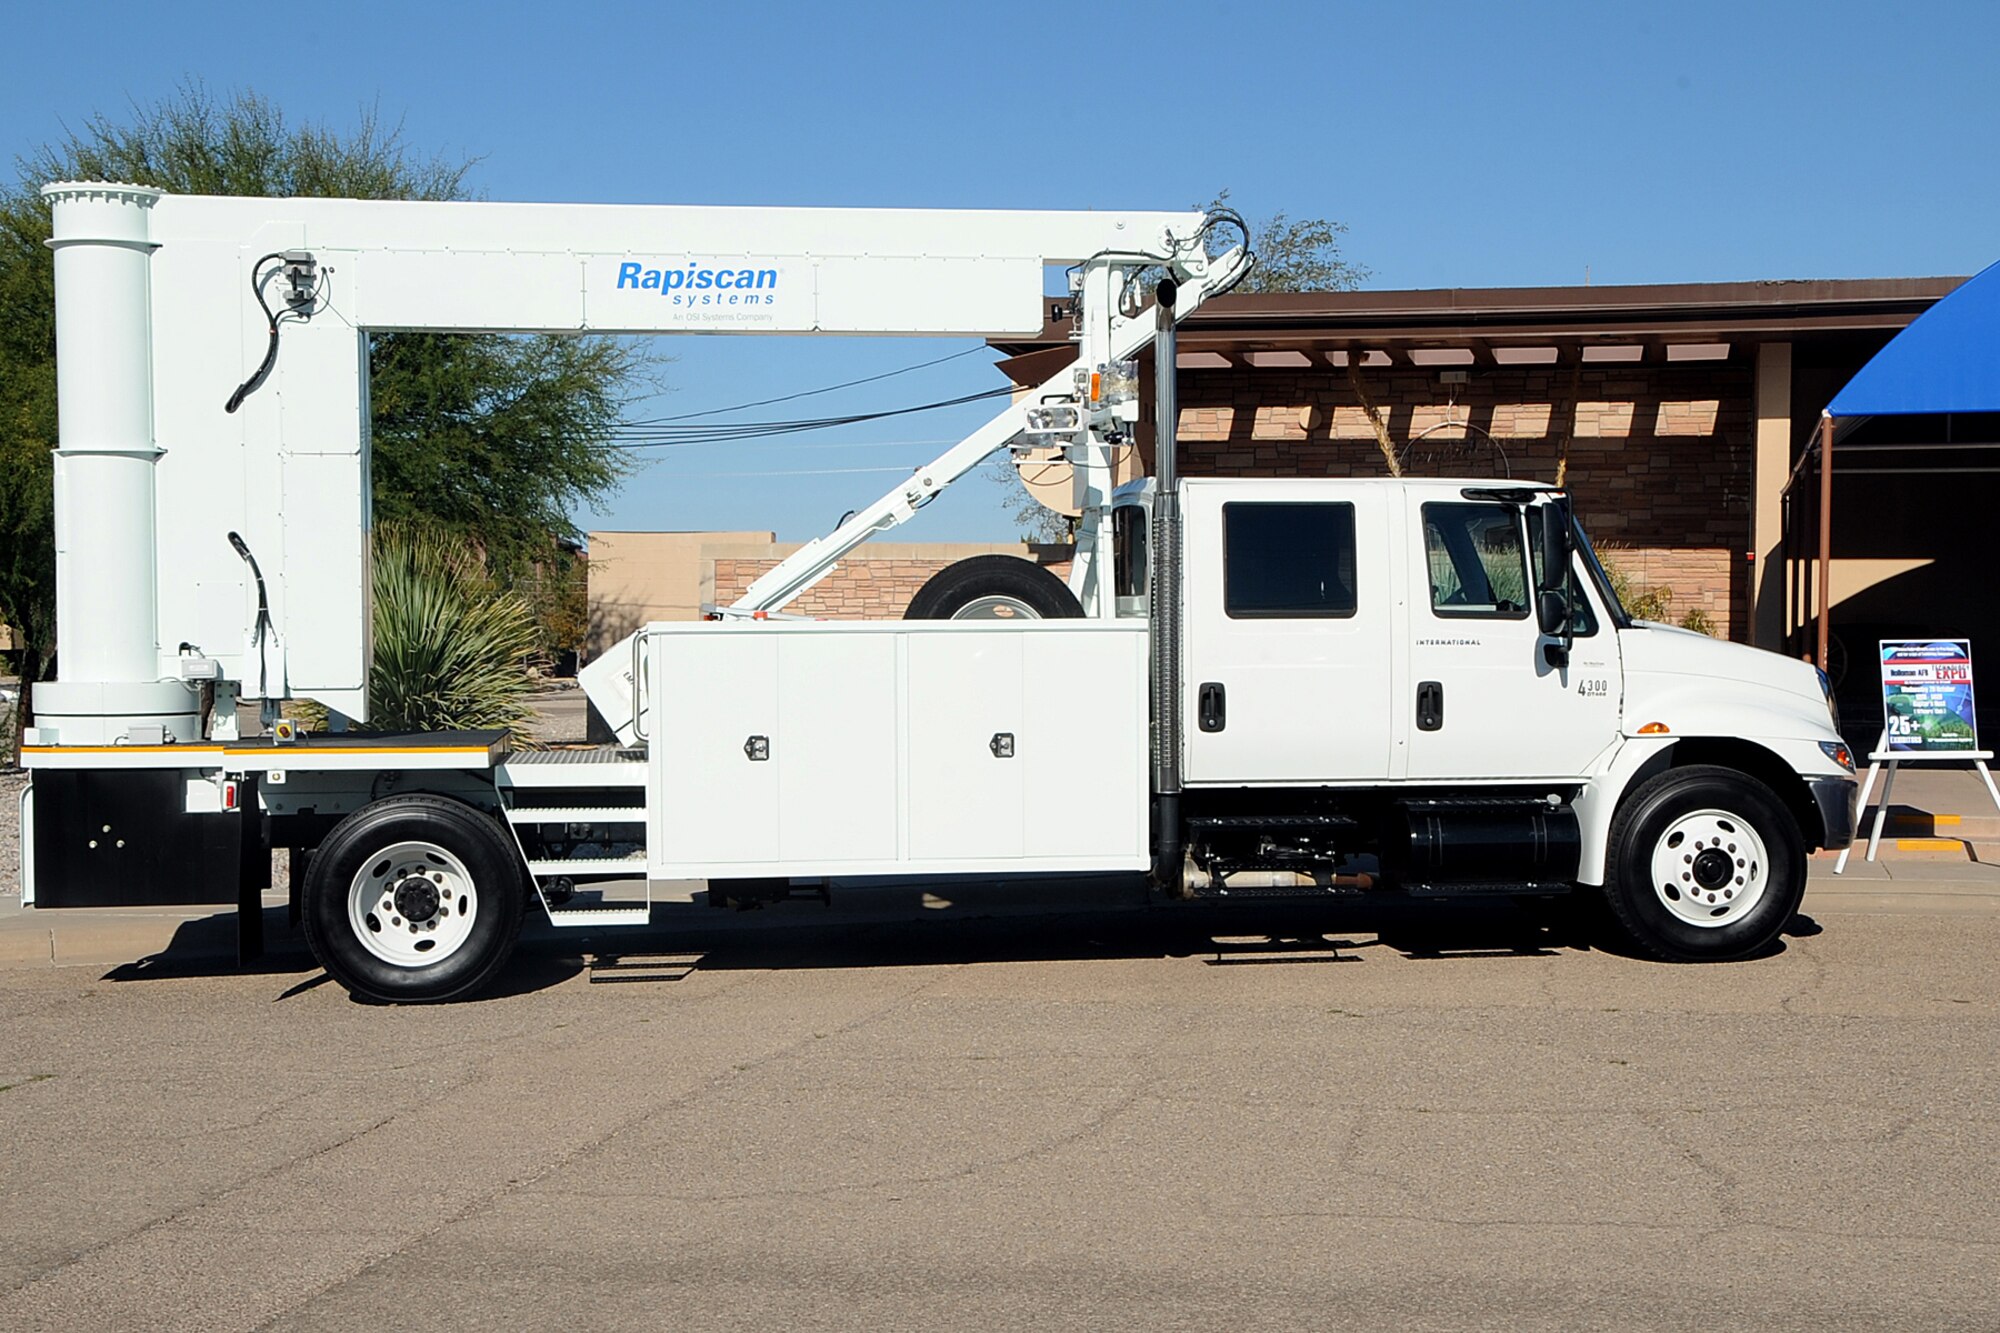 Pictured is one of two Gamma Ray Detection Moblie Systems donated to Holloman Air Force Base, N.M., October 29. Rapiscan Systems Incorporated describes the GaRDS Mobile as a highly advanced, self-contained, mobile inspection system for screening trucks, cargo containers and passenger vehicles for contraband and explosives. (U.S.Air Force photo/Tech. Sgt Chris Flahive)
